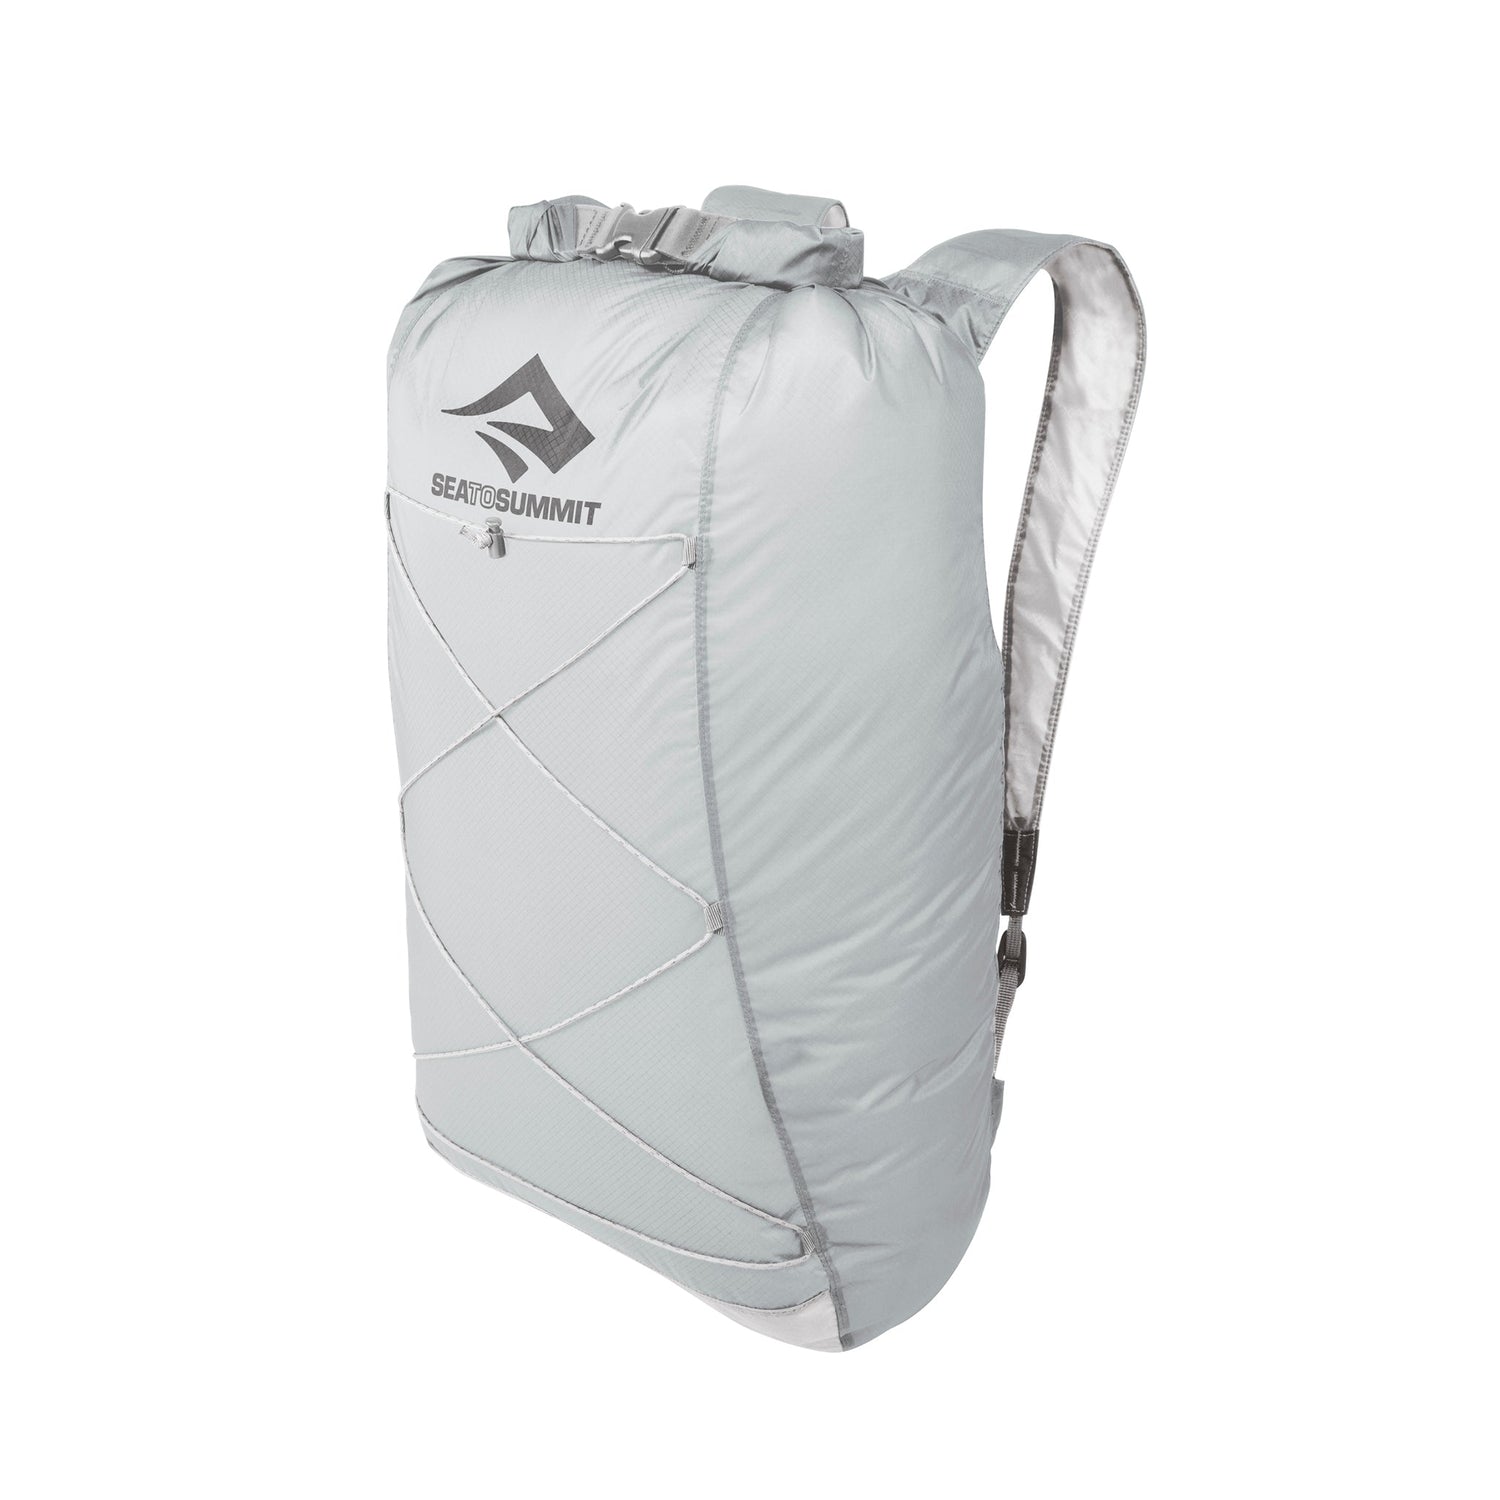 22 litre / High Rise Grey || Ultra Sil Dry Day Pack